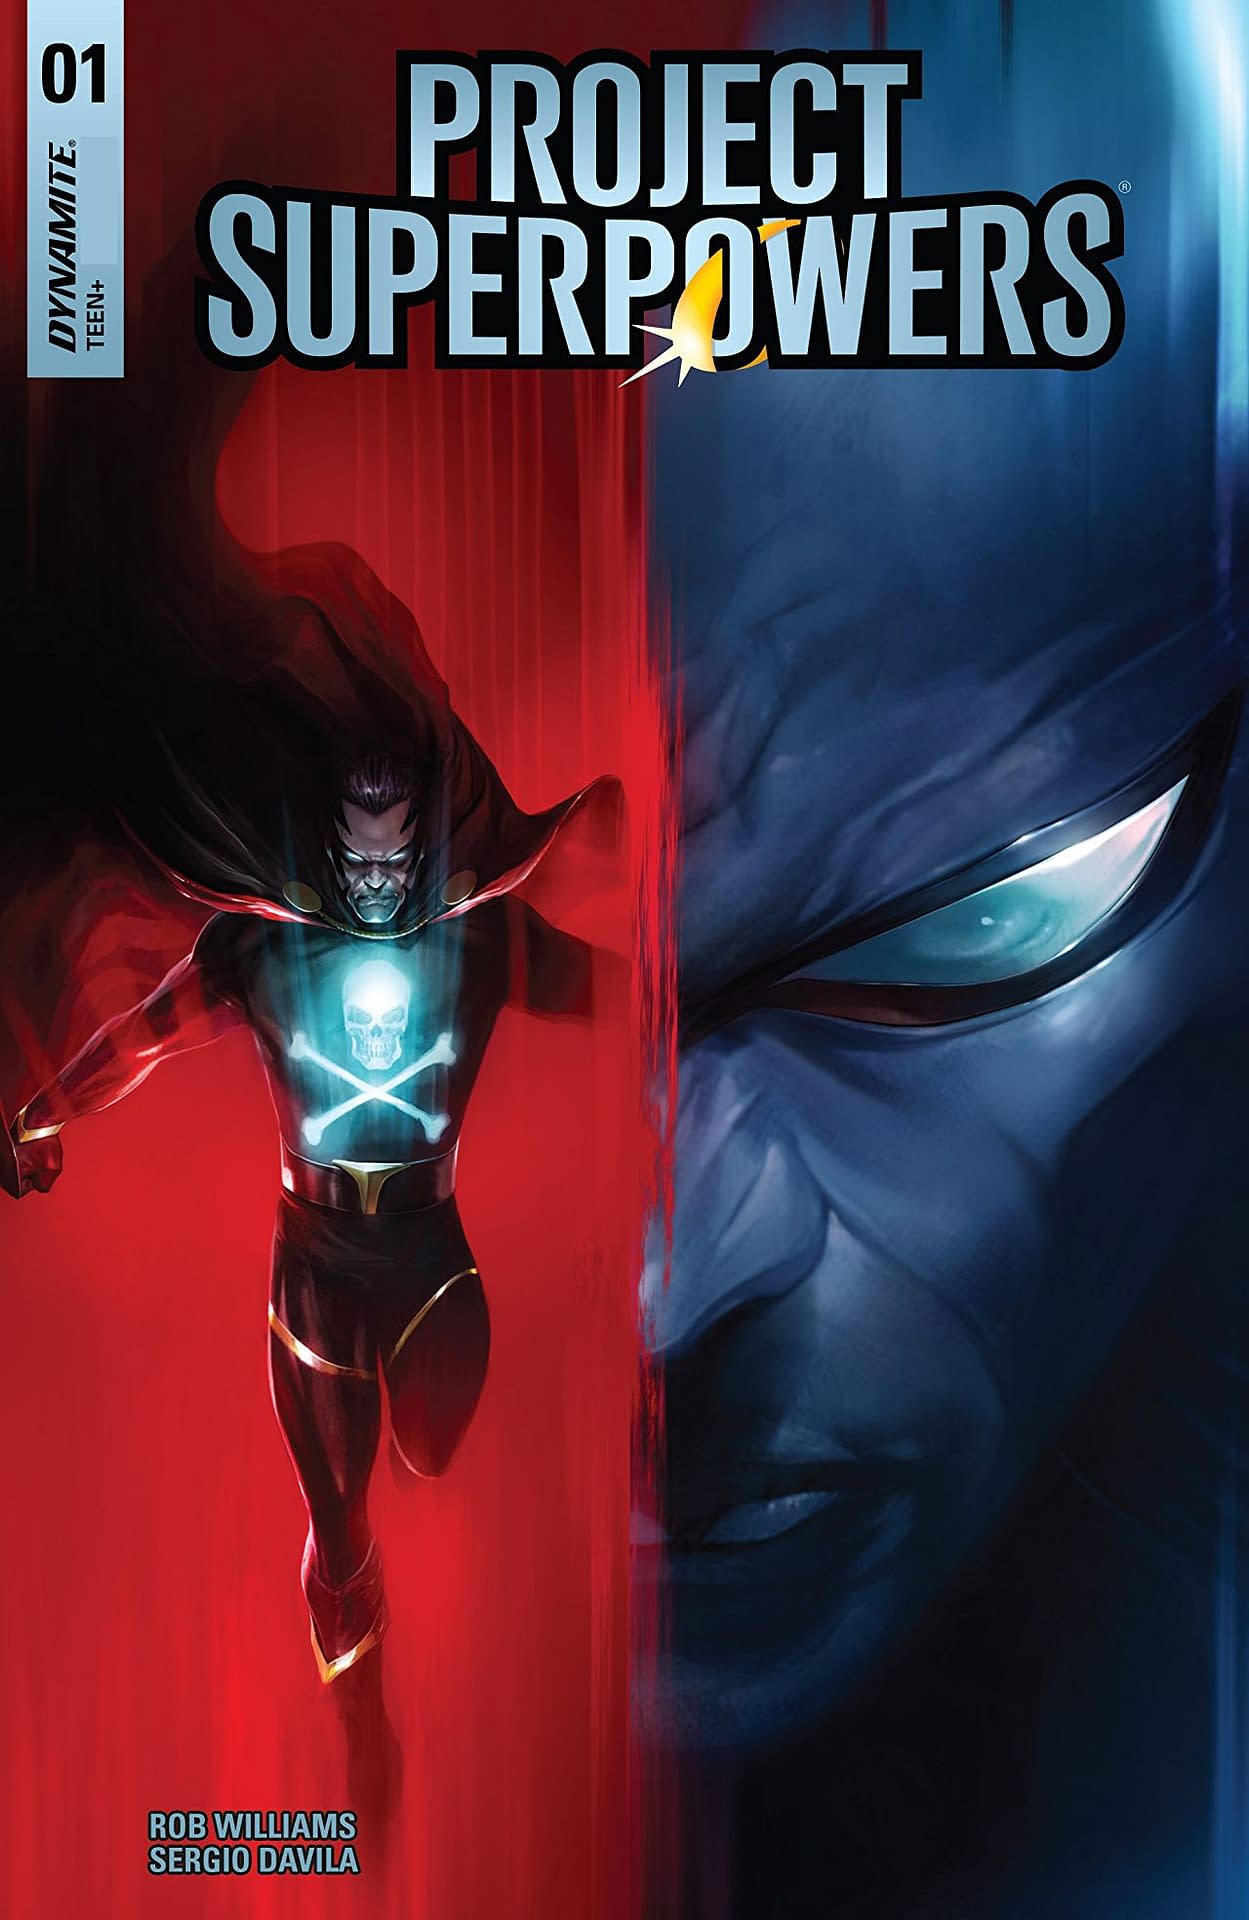 Project: Superpowers #1 Review: The Project Begins Anew